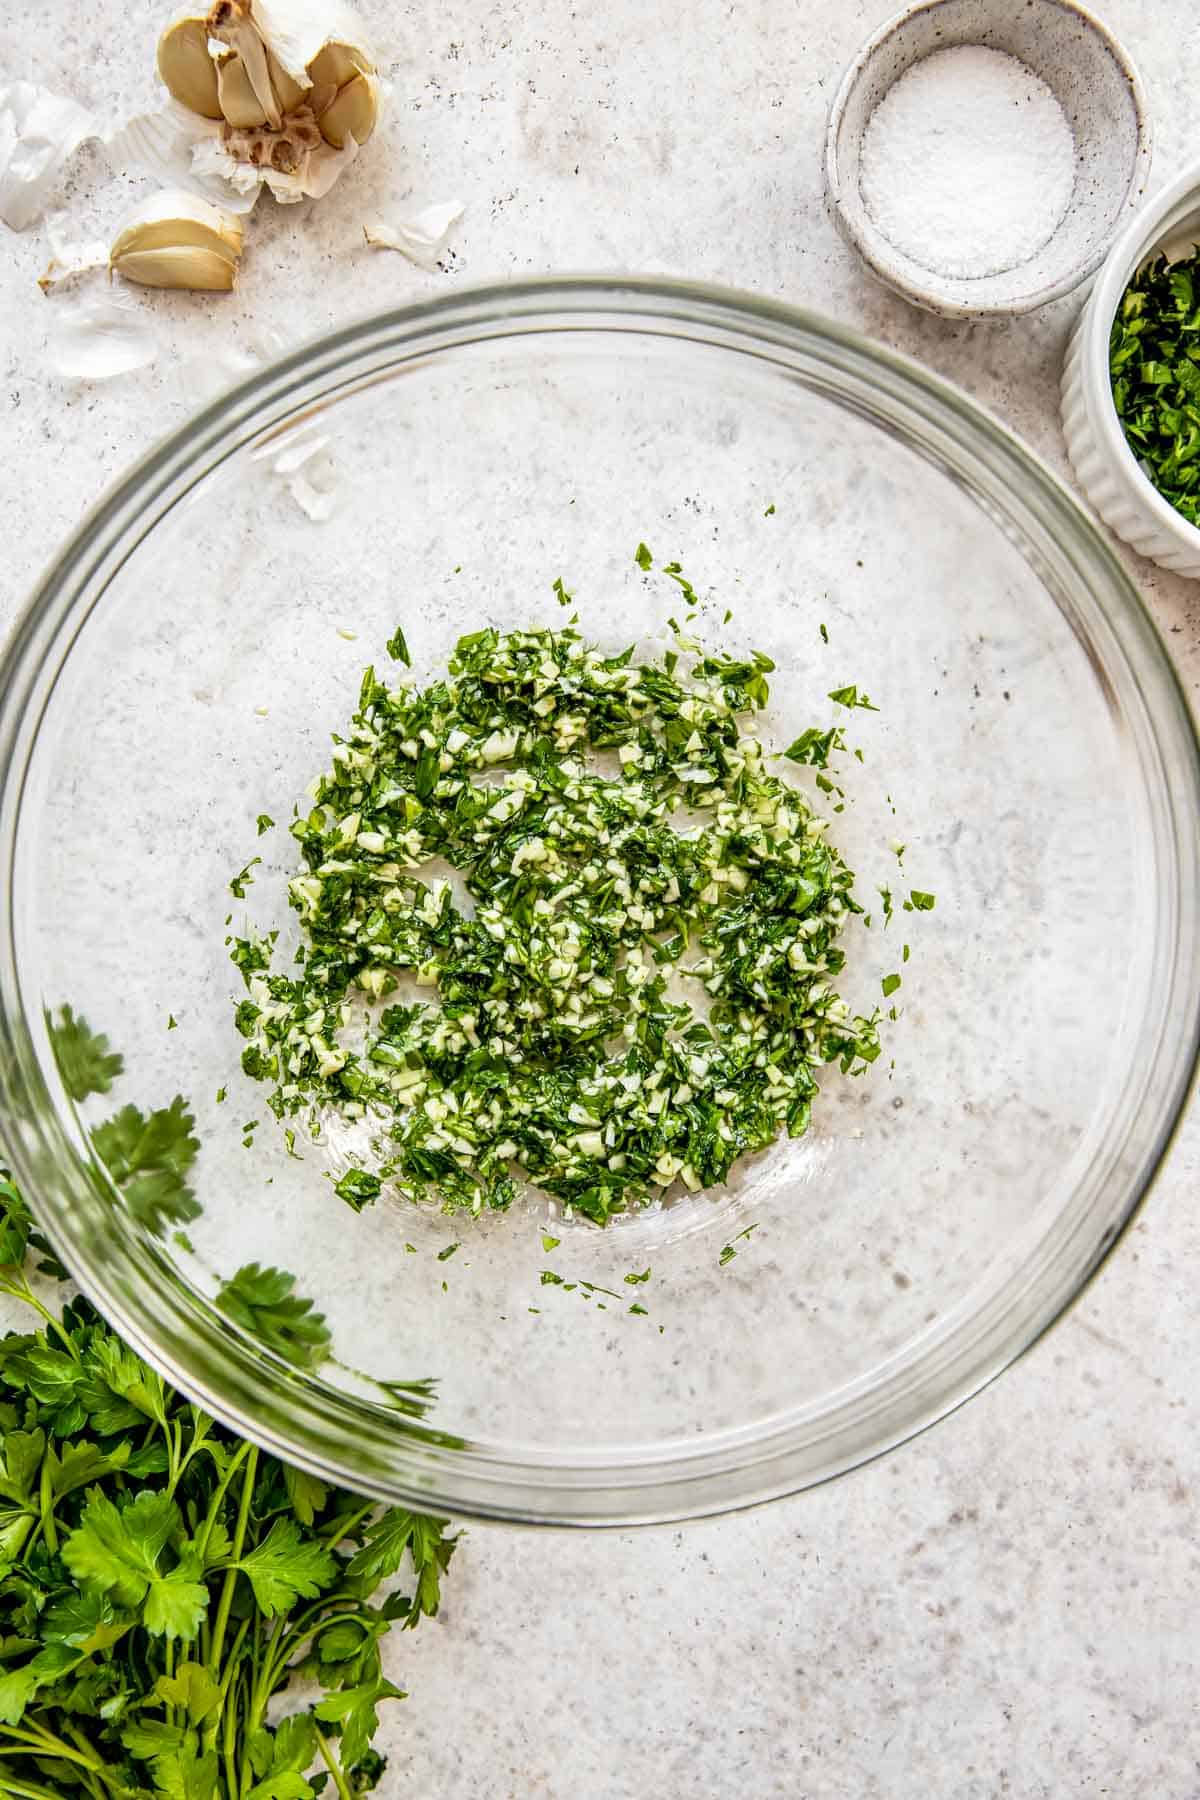 Garlic, parsley and oil are mixed together in a bowl.